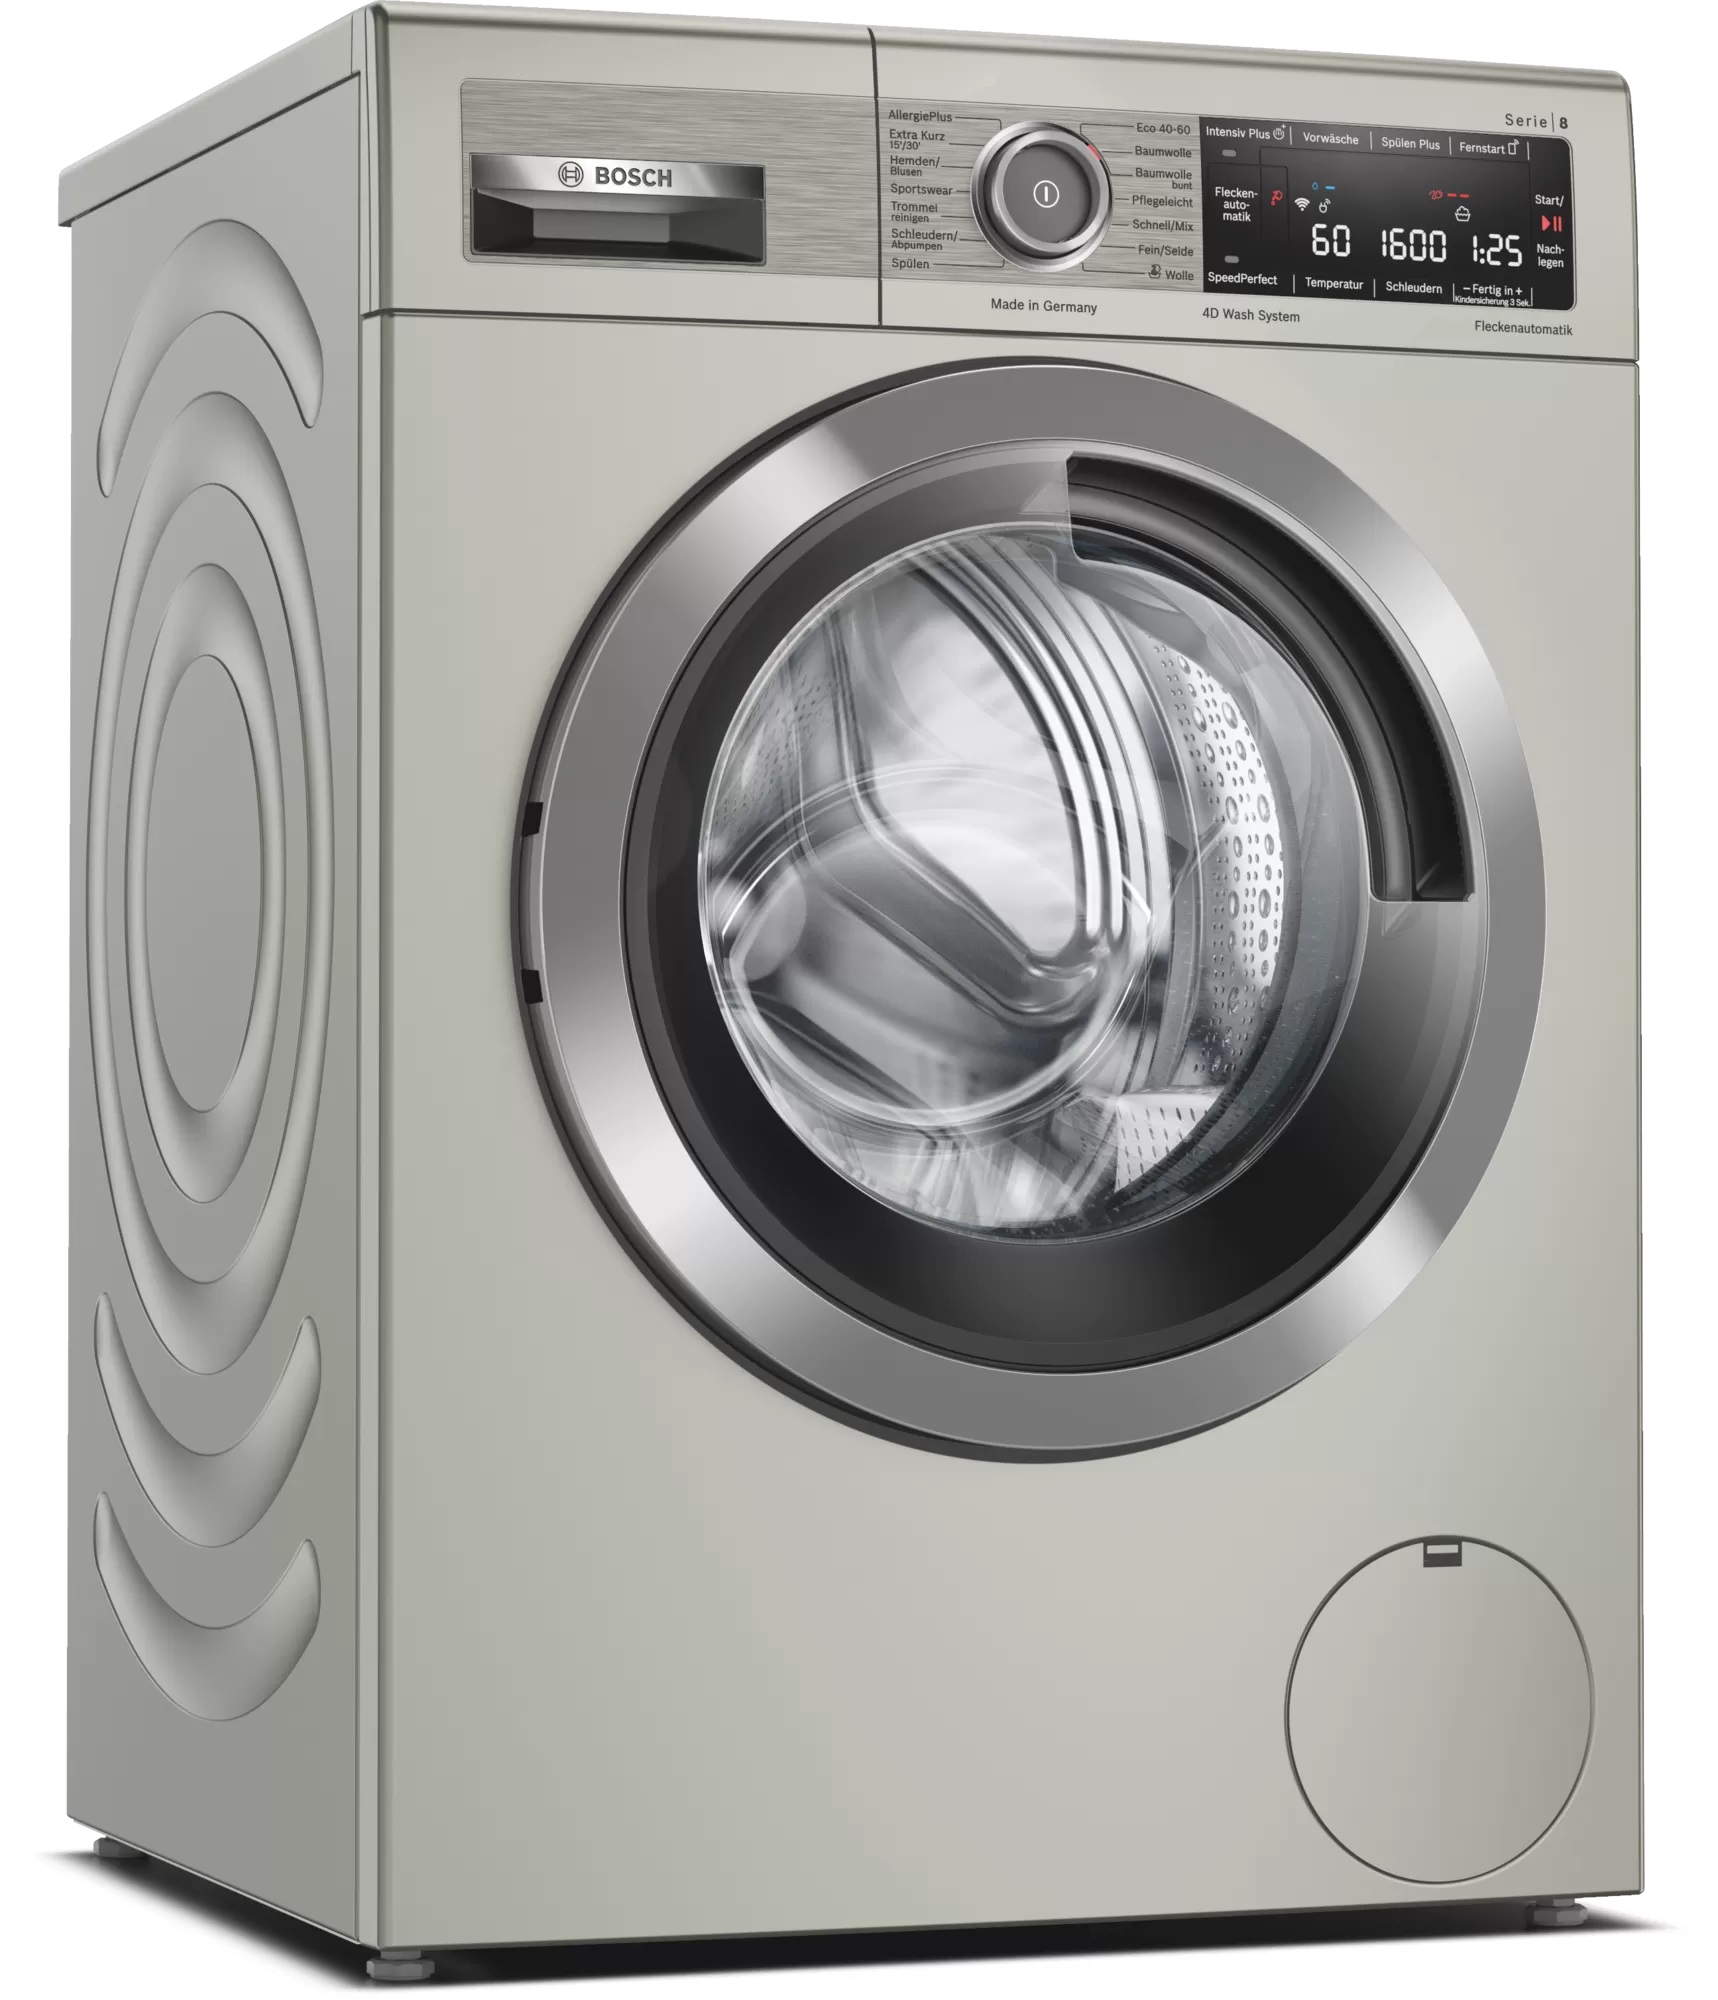 eco 40 60 wash bosch Cheap Sell - OFF 69%